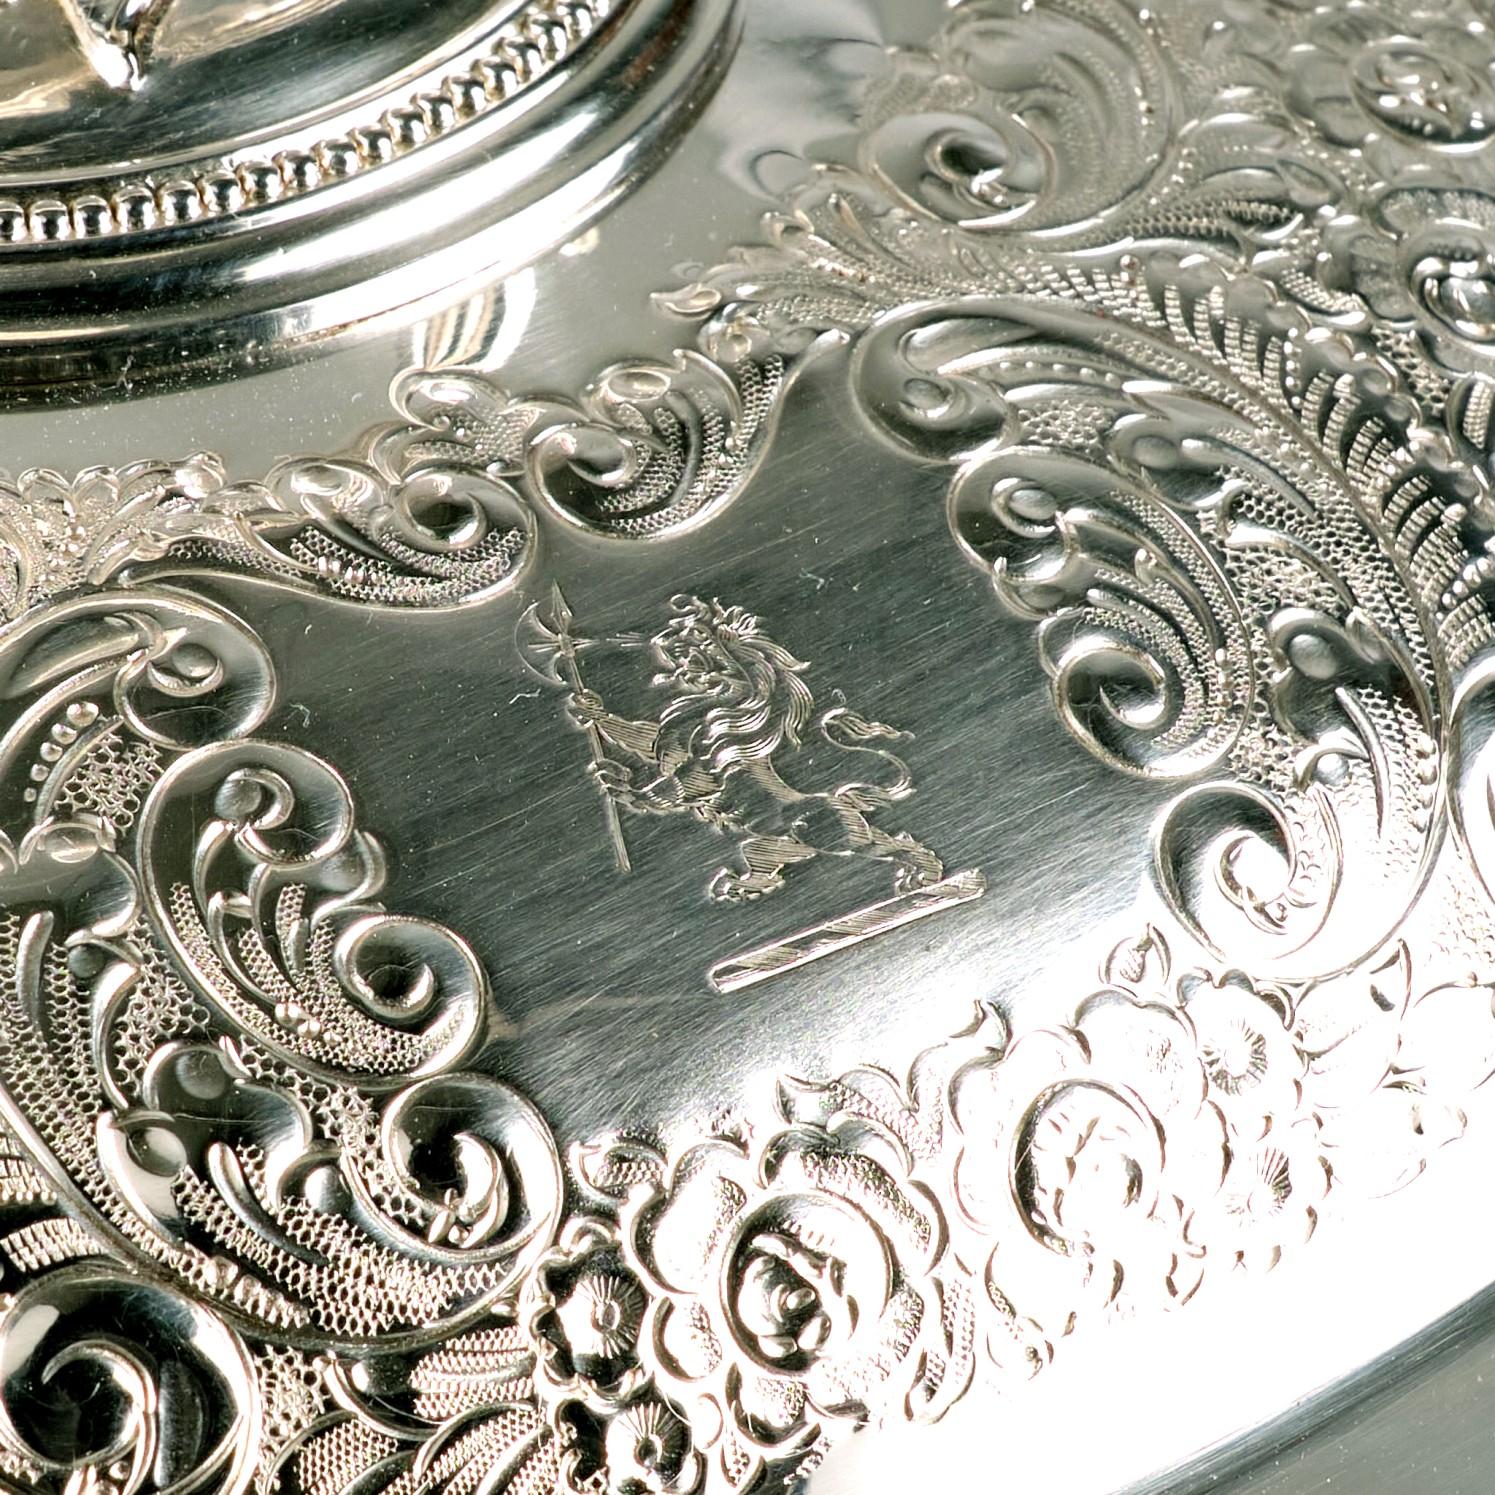 A Very Fine 19th Century Silver Plated Lidded Soup Tureen by Elkington & Company For Sale 1